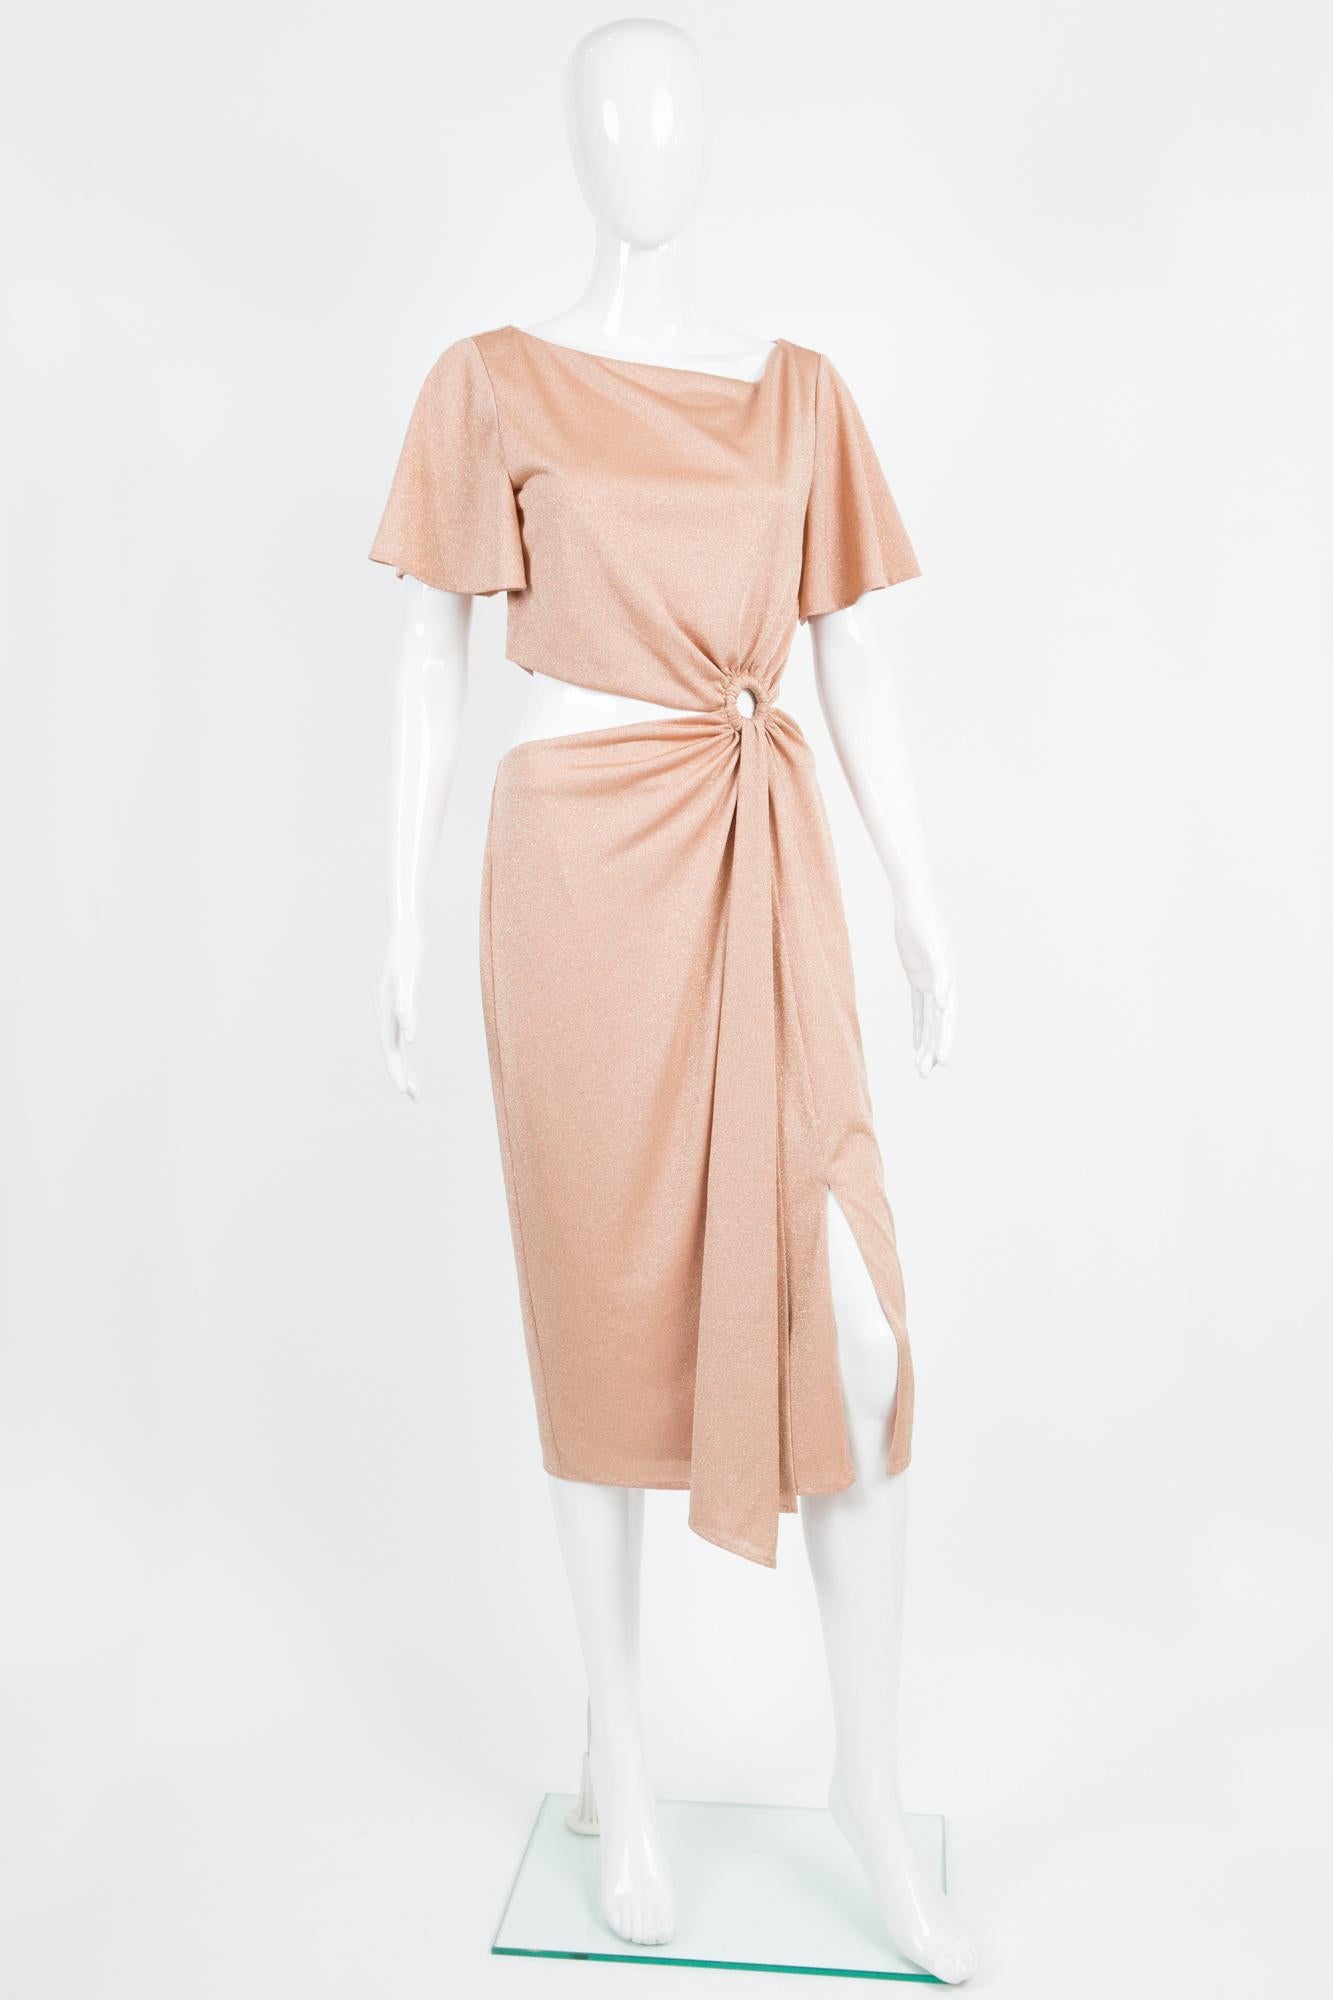 Rachel Zoe pink blush lurex cocktail dress featuring a fluid jersey fabric, a mid length, an asymmetric front ring with sides opens, a front slit, a center back zip opening, dress fully silk jersey lined.
Estimated size 36fr/ US4/ UK8
We guarantee